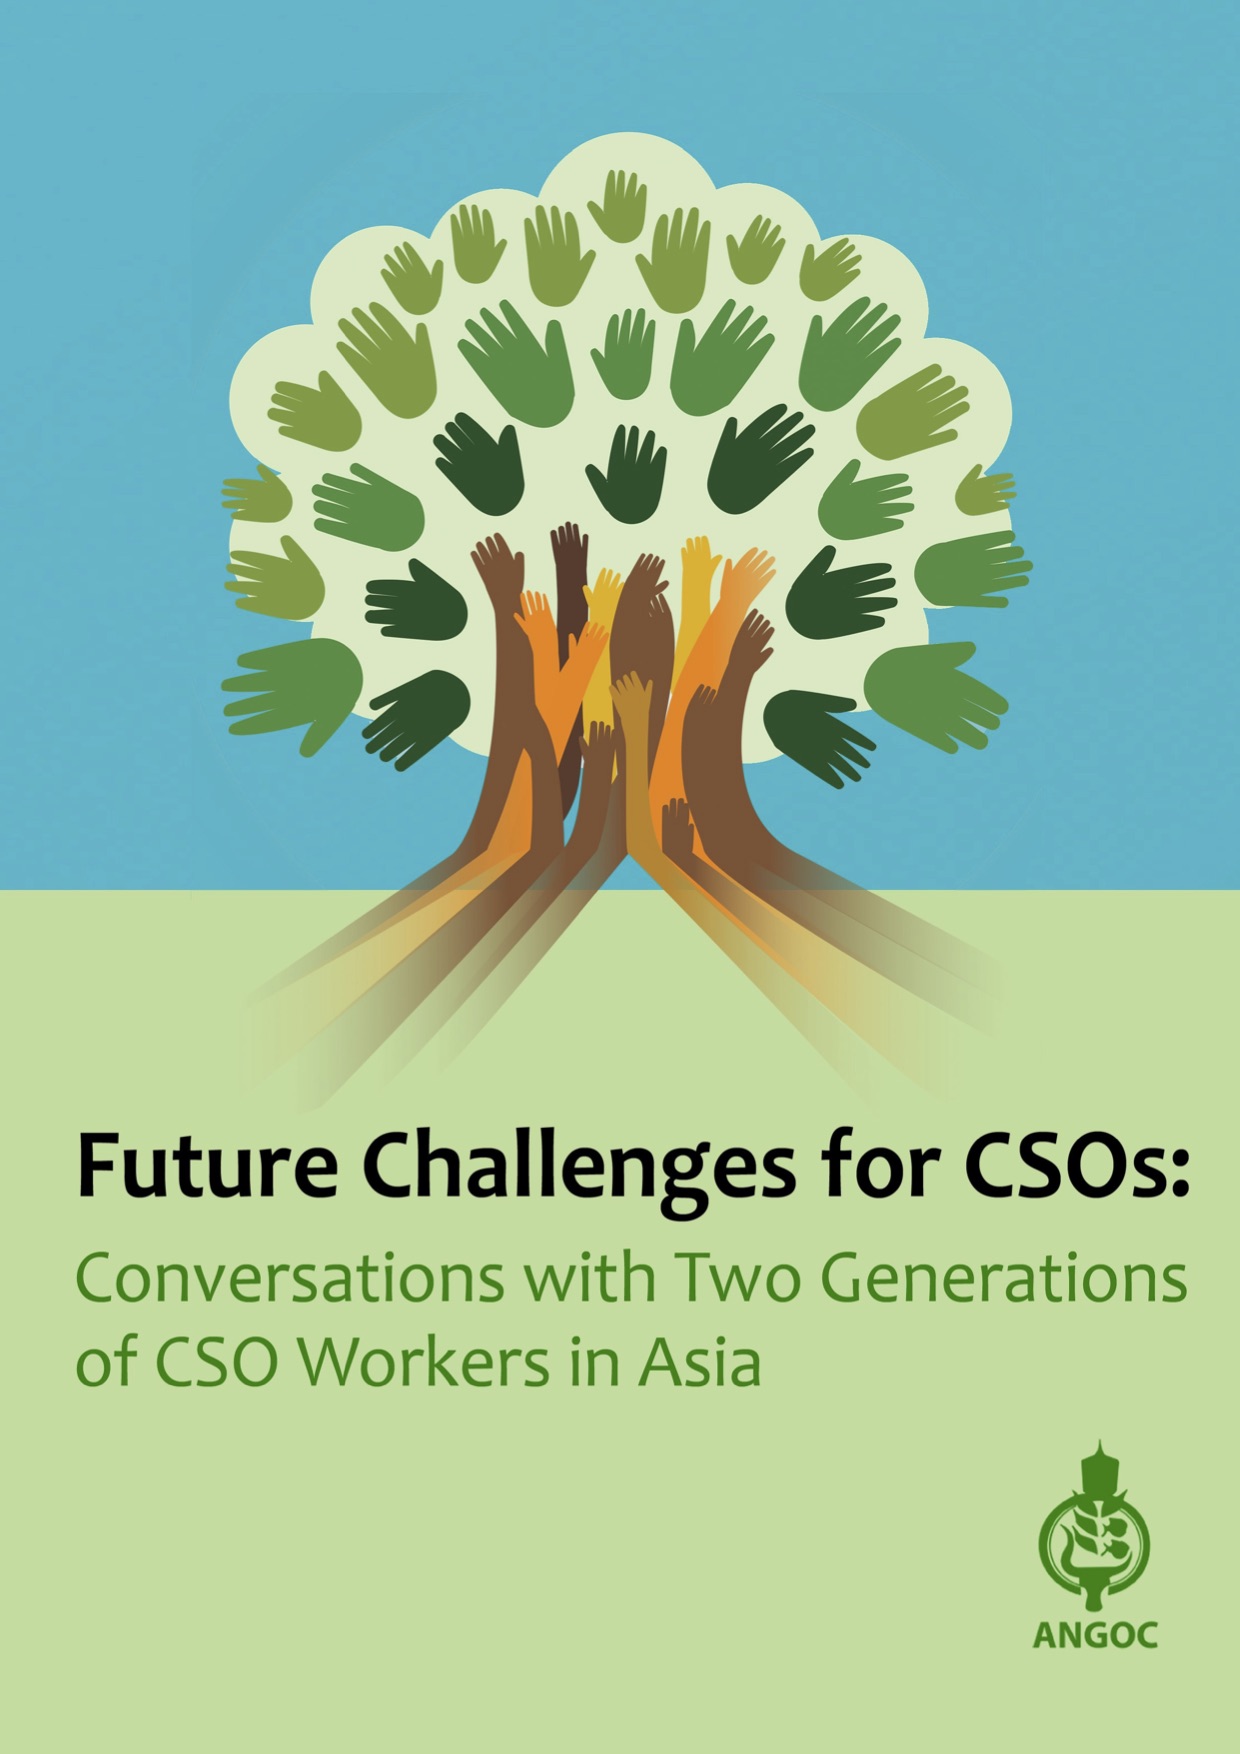 ANGOC Launches Paper on Future Challenges for CSOs in Asia